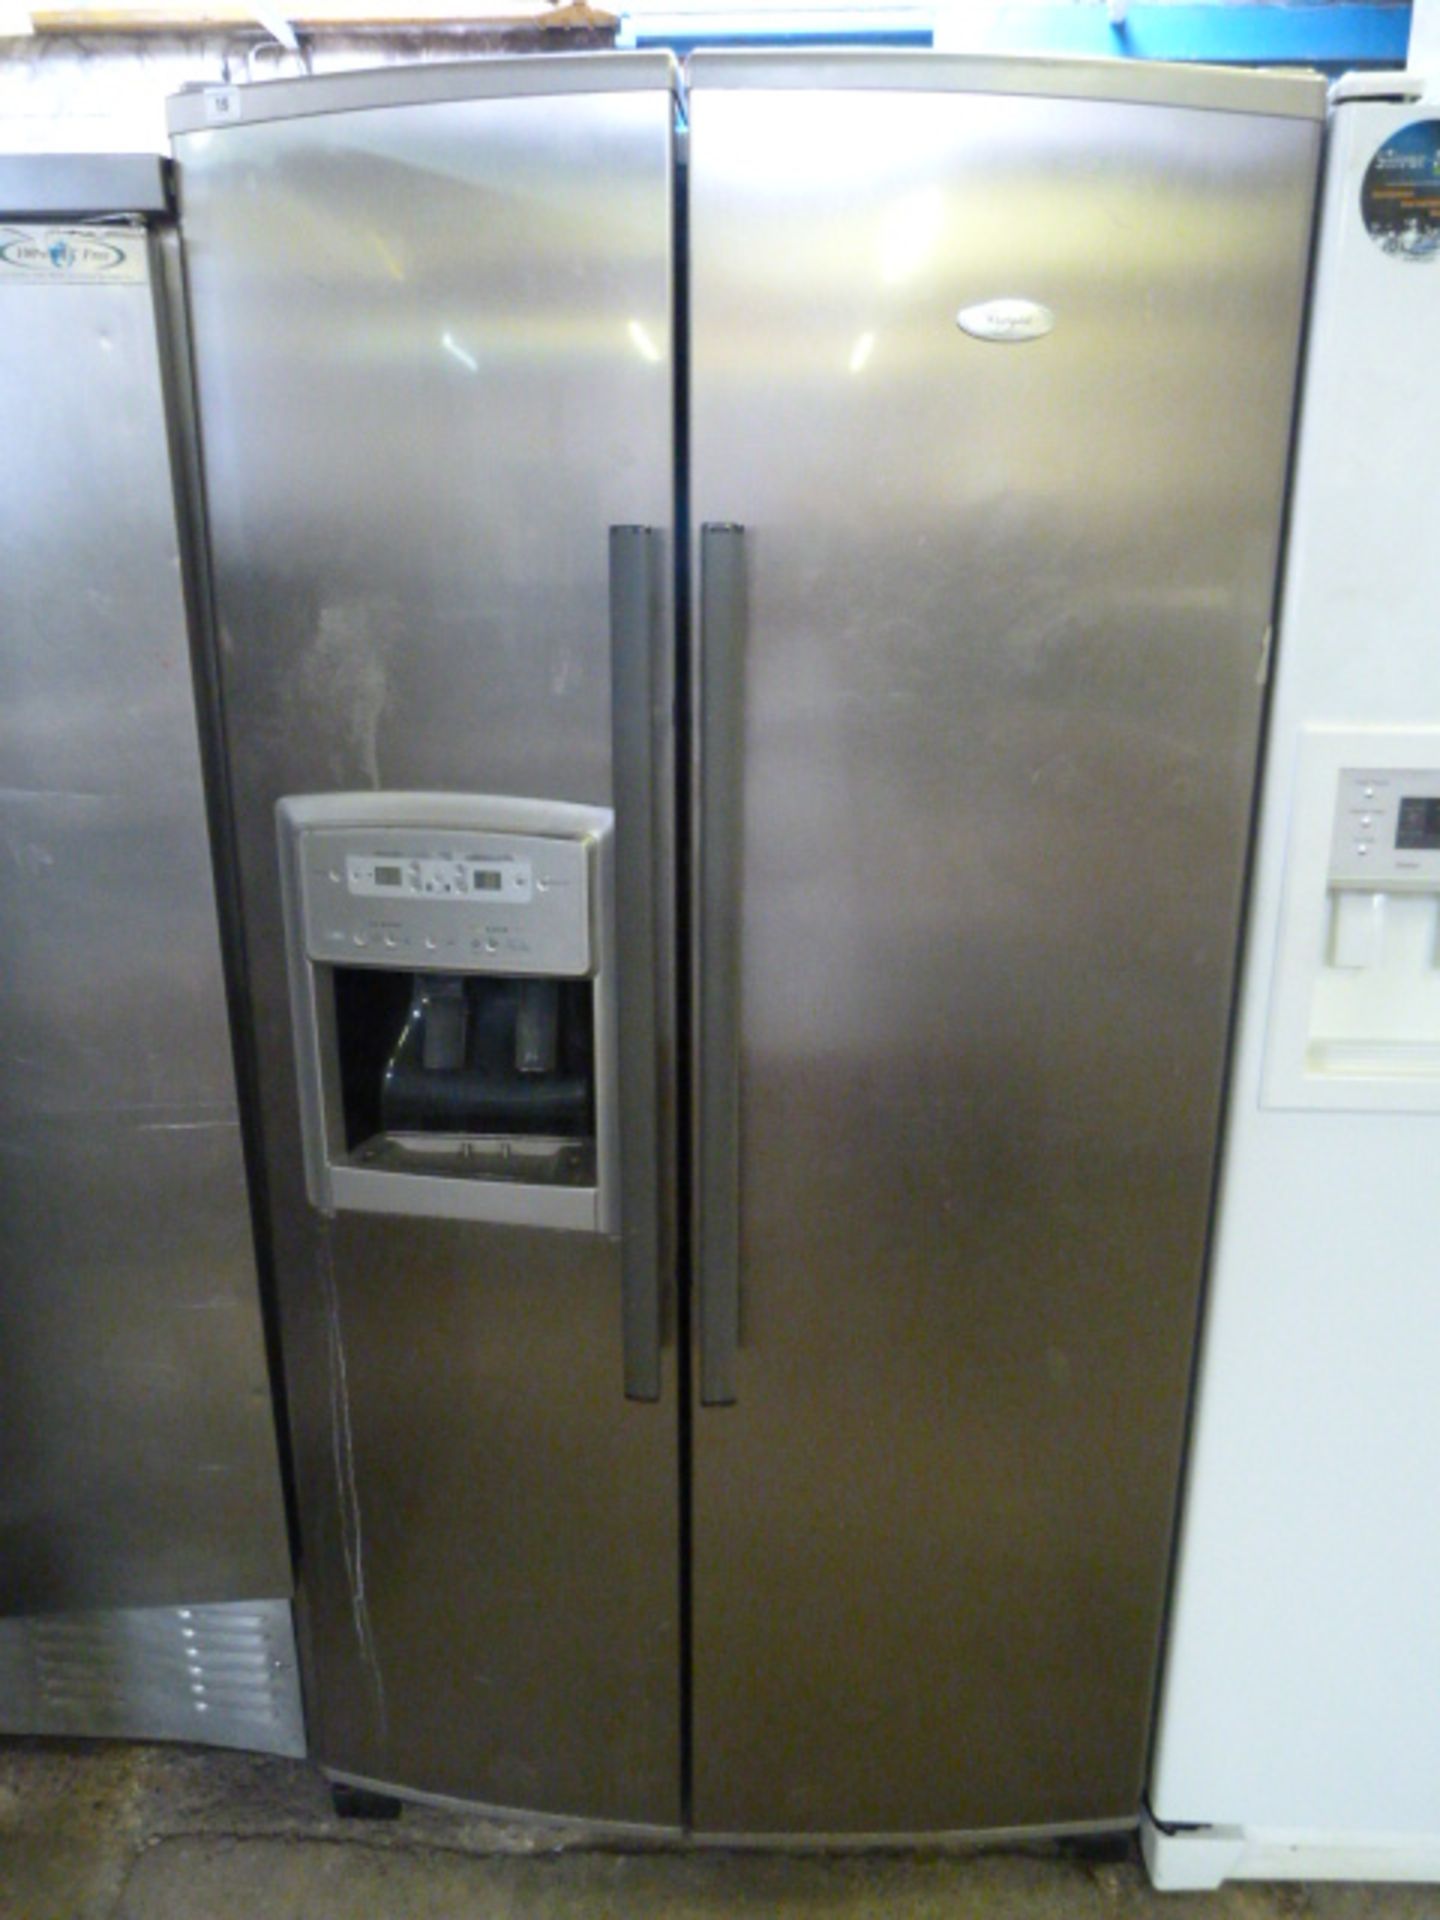 Philips Whirlpool American Style Fridge Freezer with Ice Maker & Water Dispenser in Silver Finish